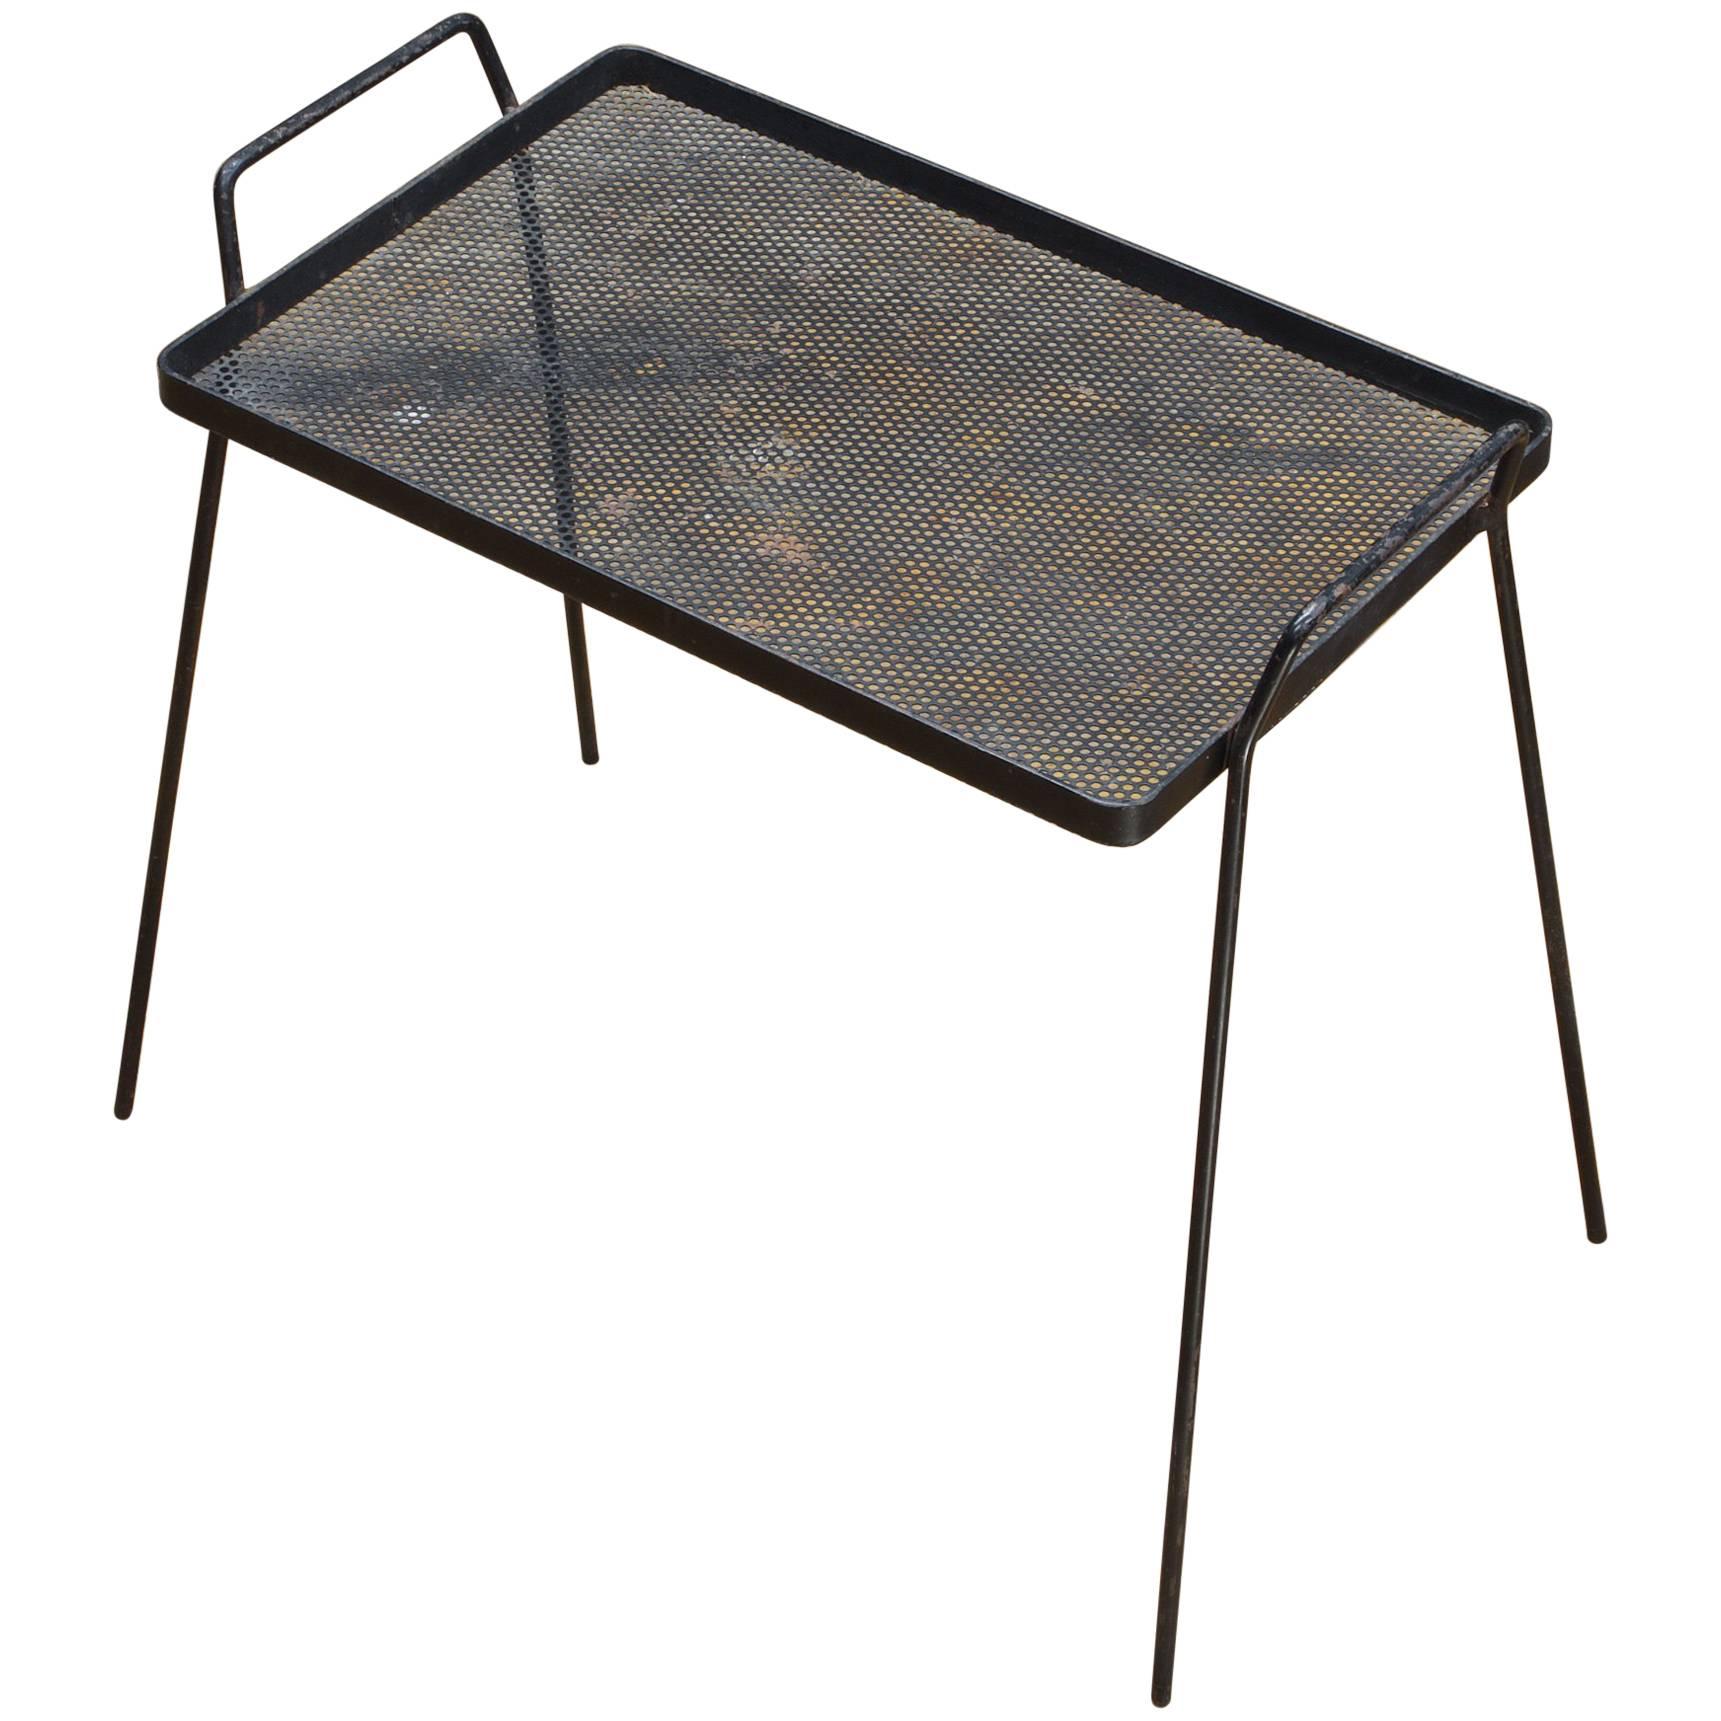 1950s Perforated Metal Minimalist Architects Side Table Serving Tray Cabinmodern